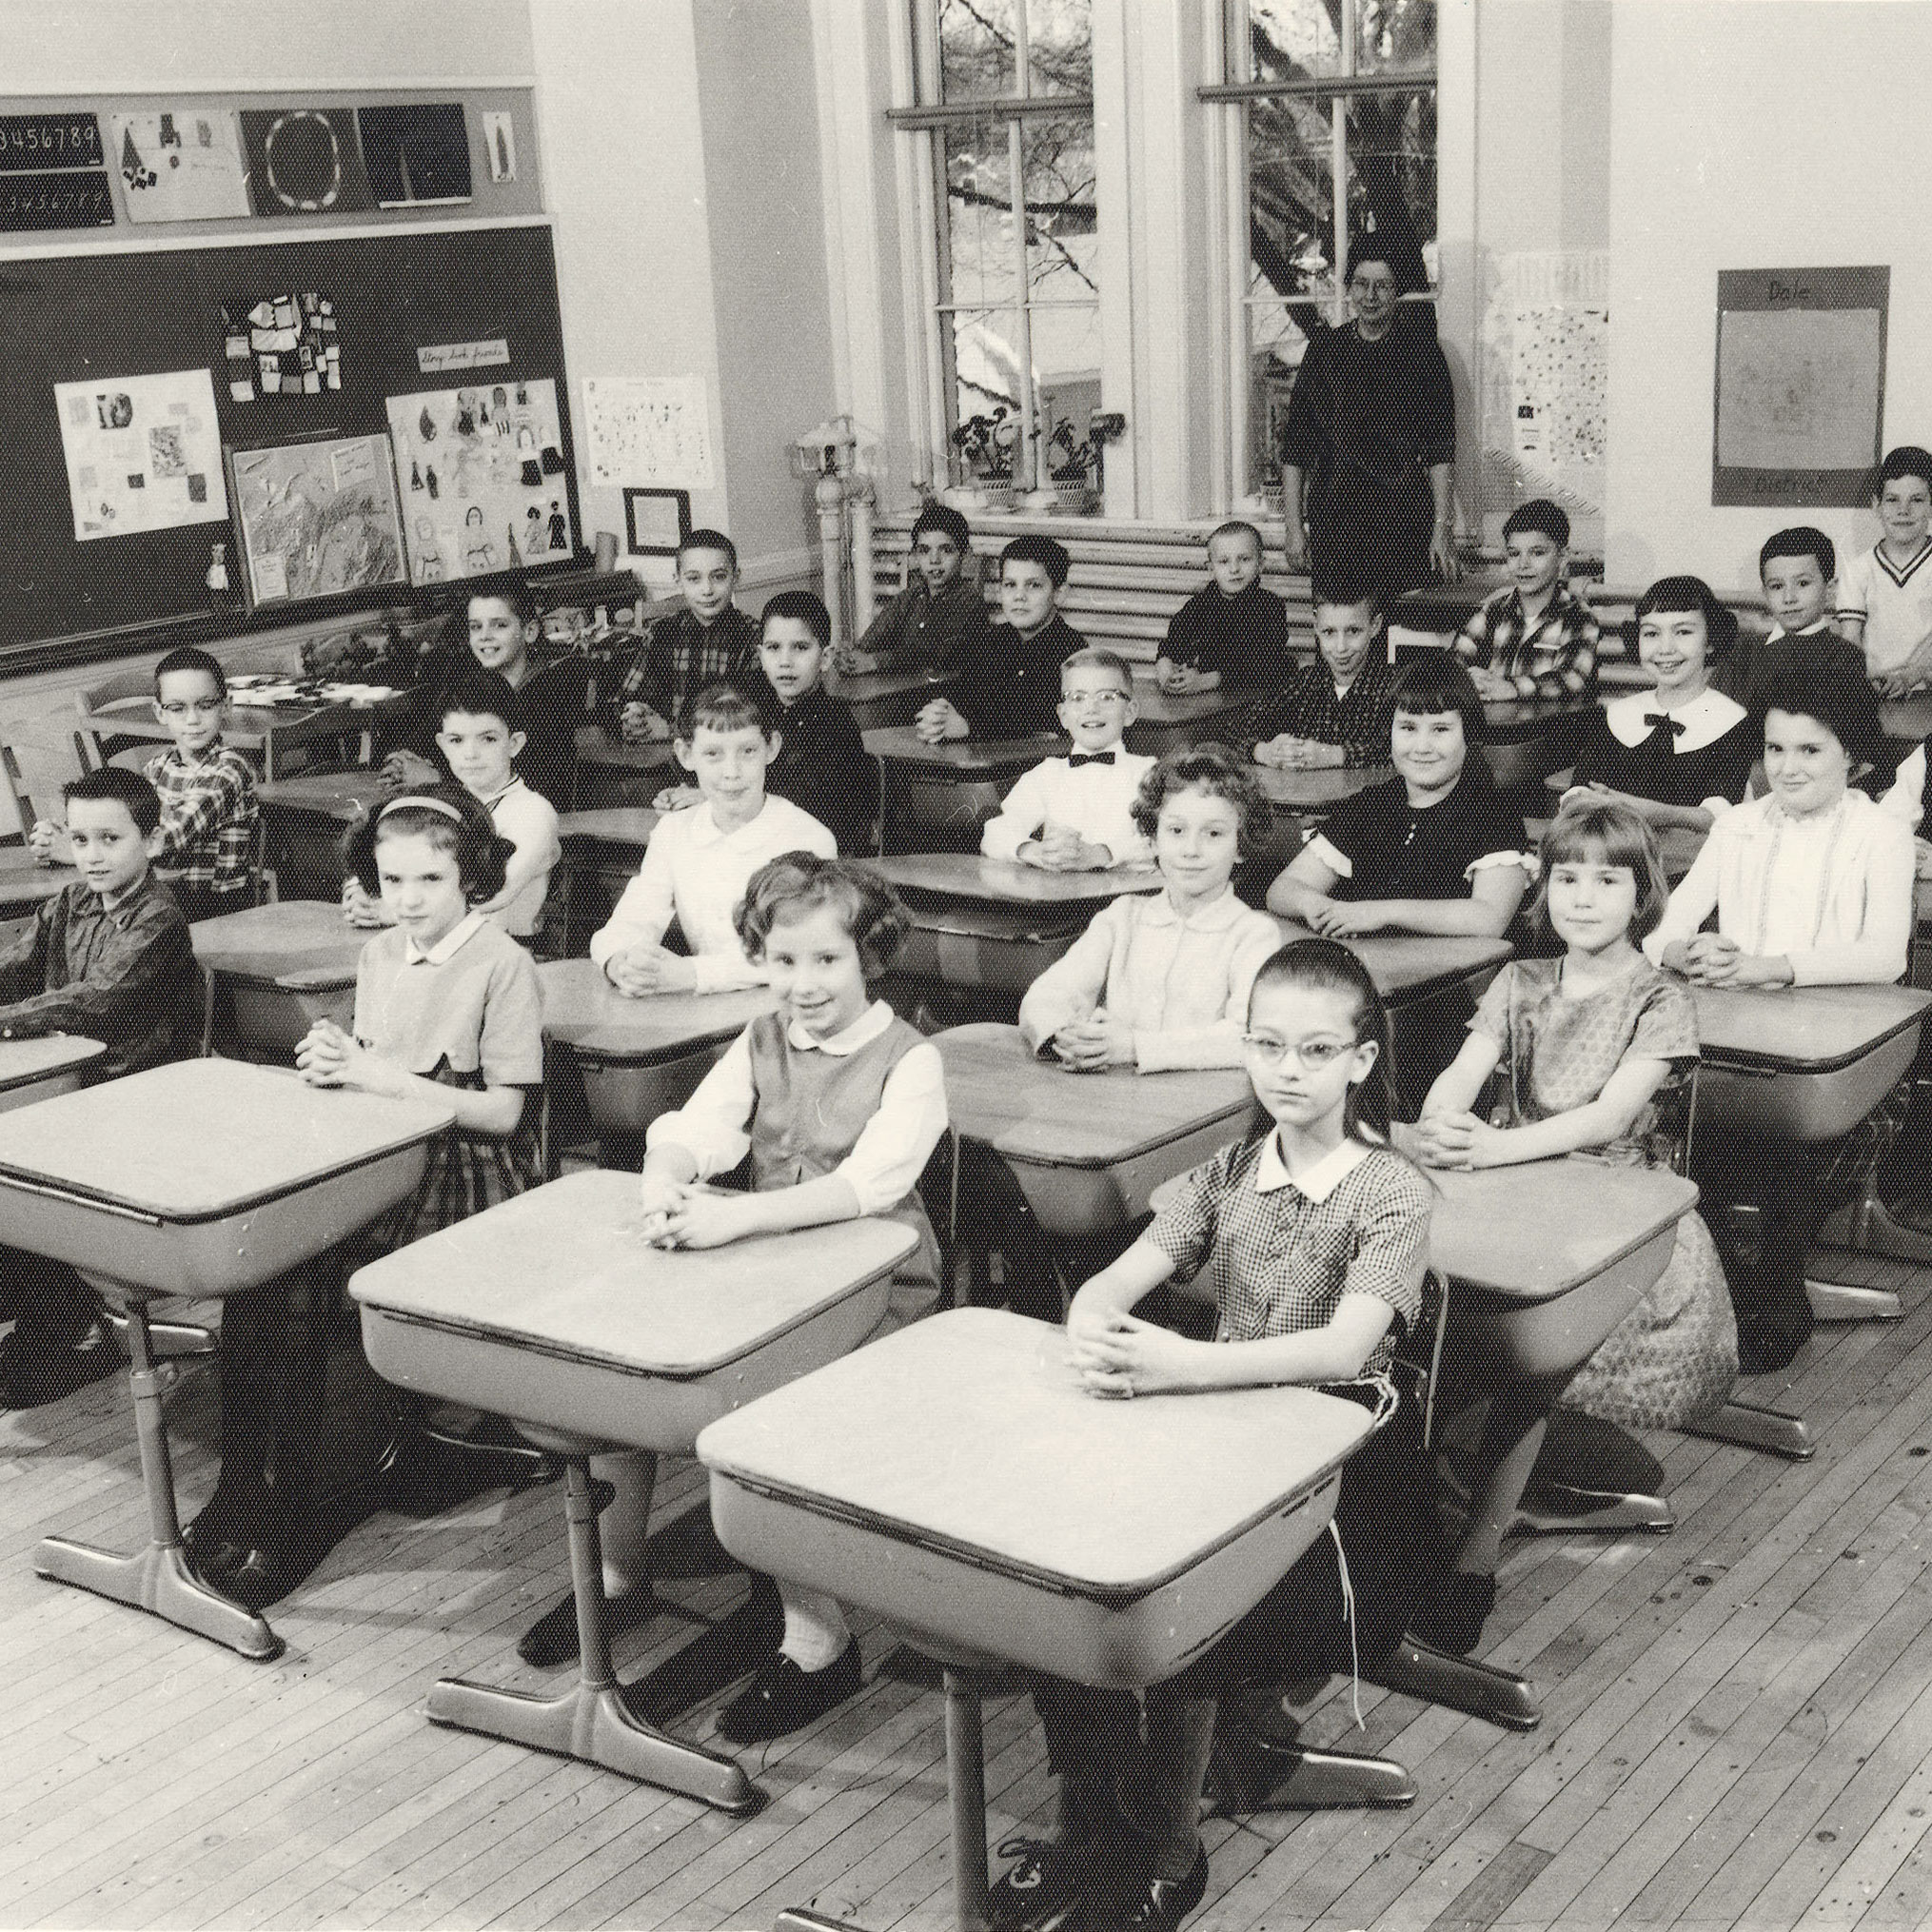 Historic, black and white photo on view in Ever Changing, Ever Oshkosh picturing students seated at their desks in a classroom